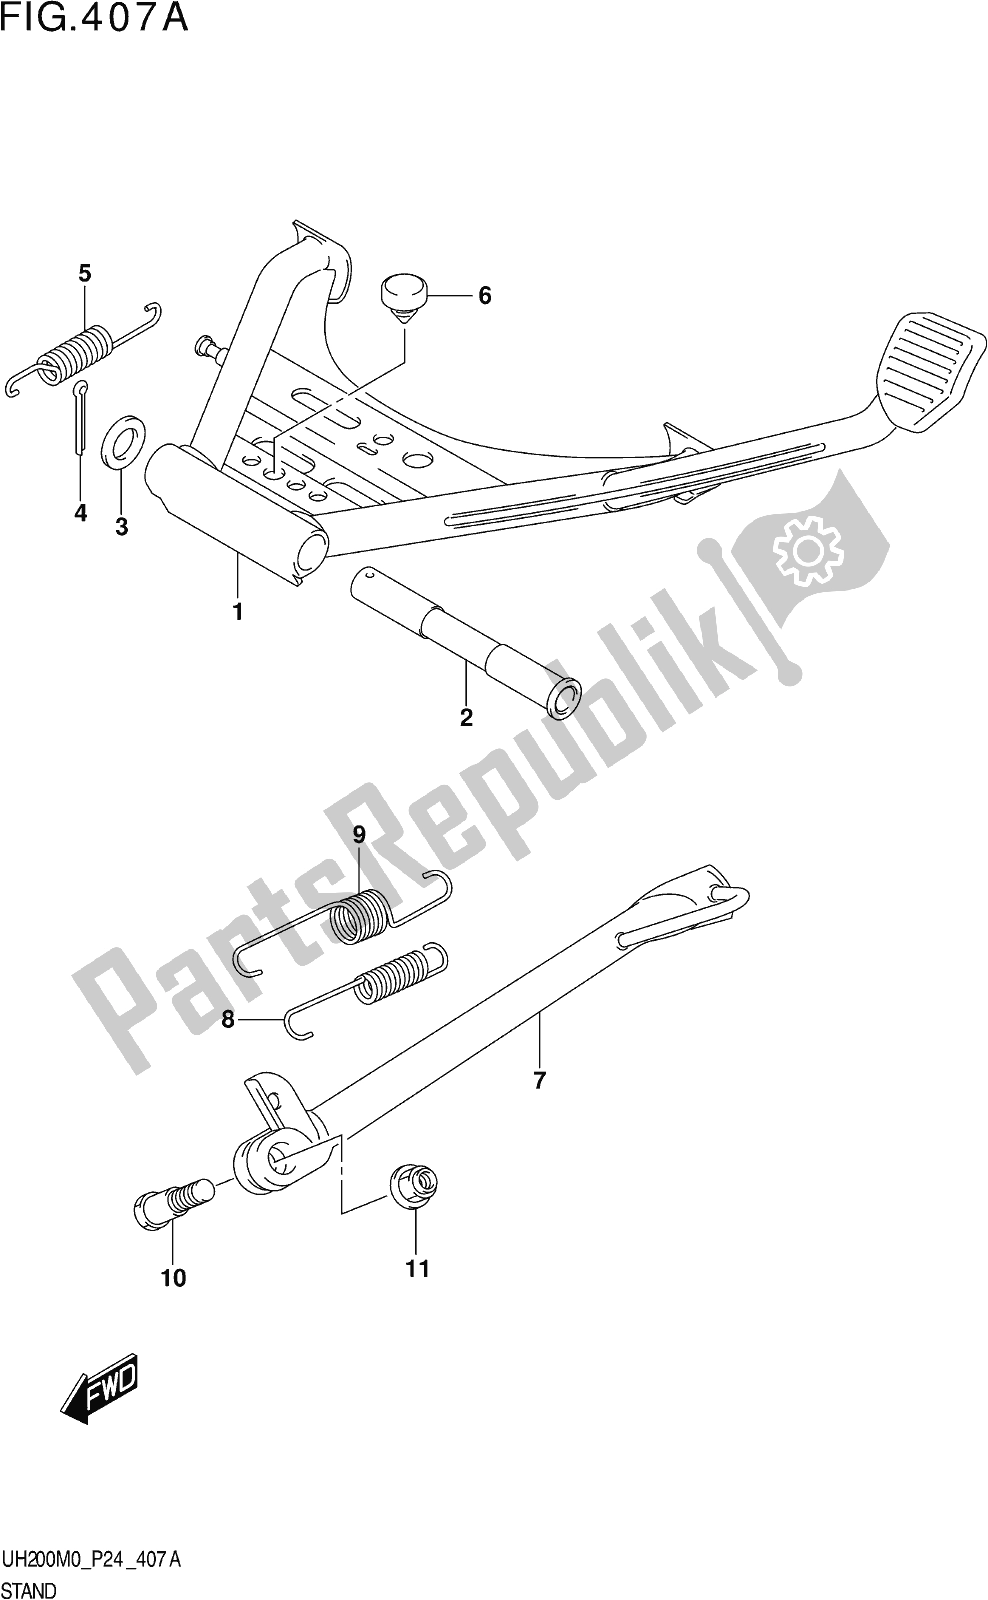 All parts for the Fig. 407a Stand of the Suzuki UH 200 2020